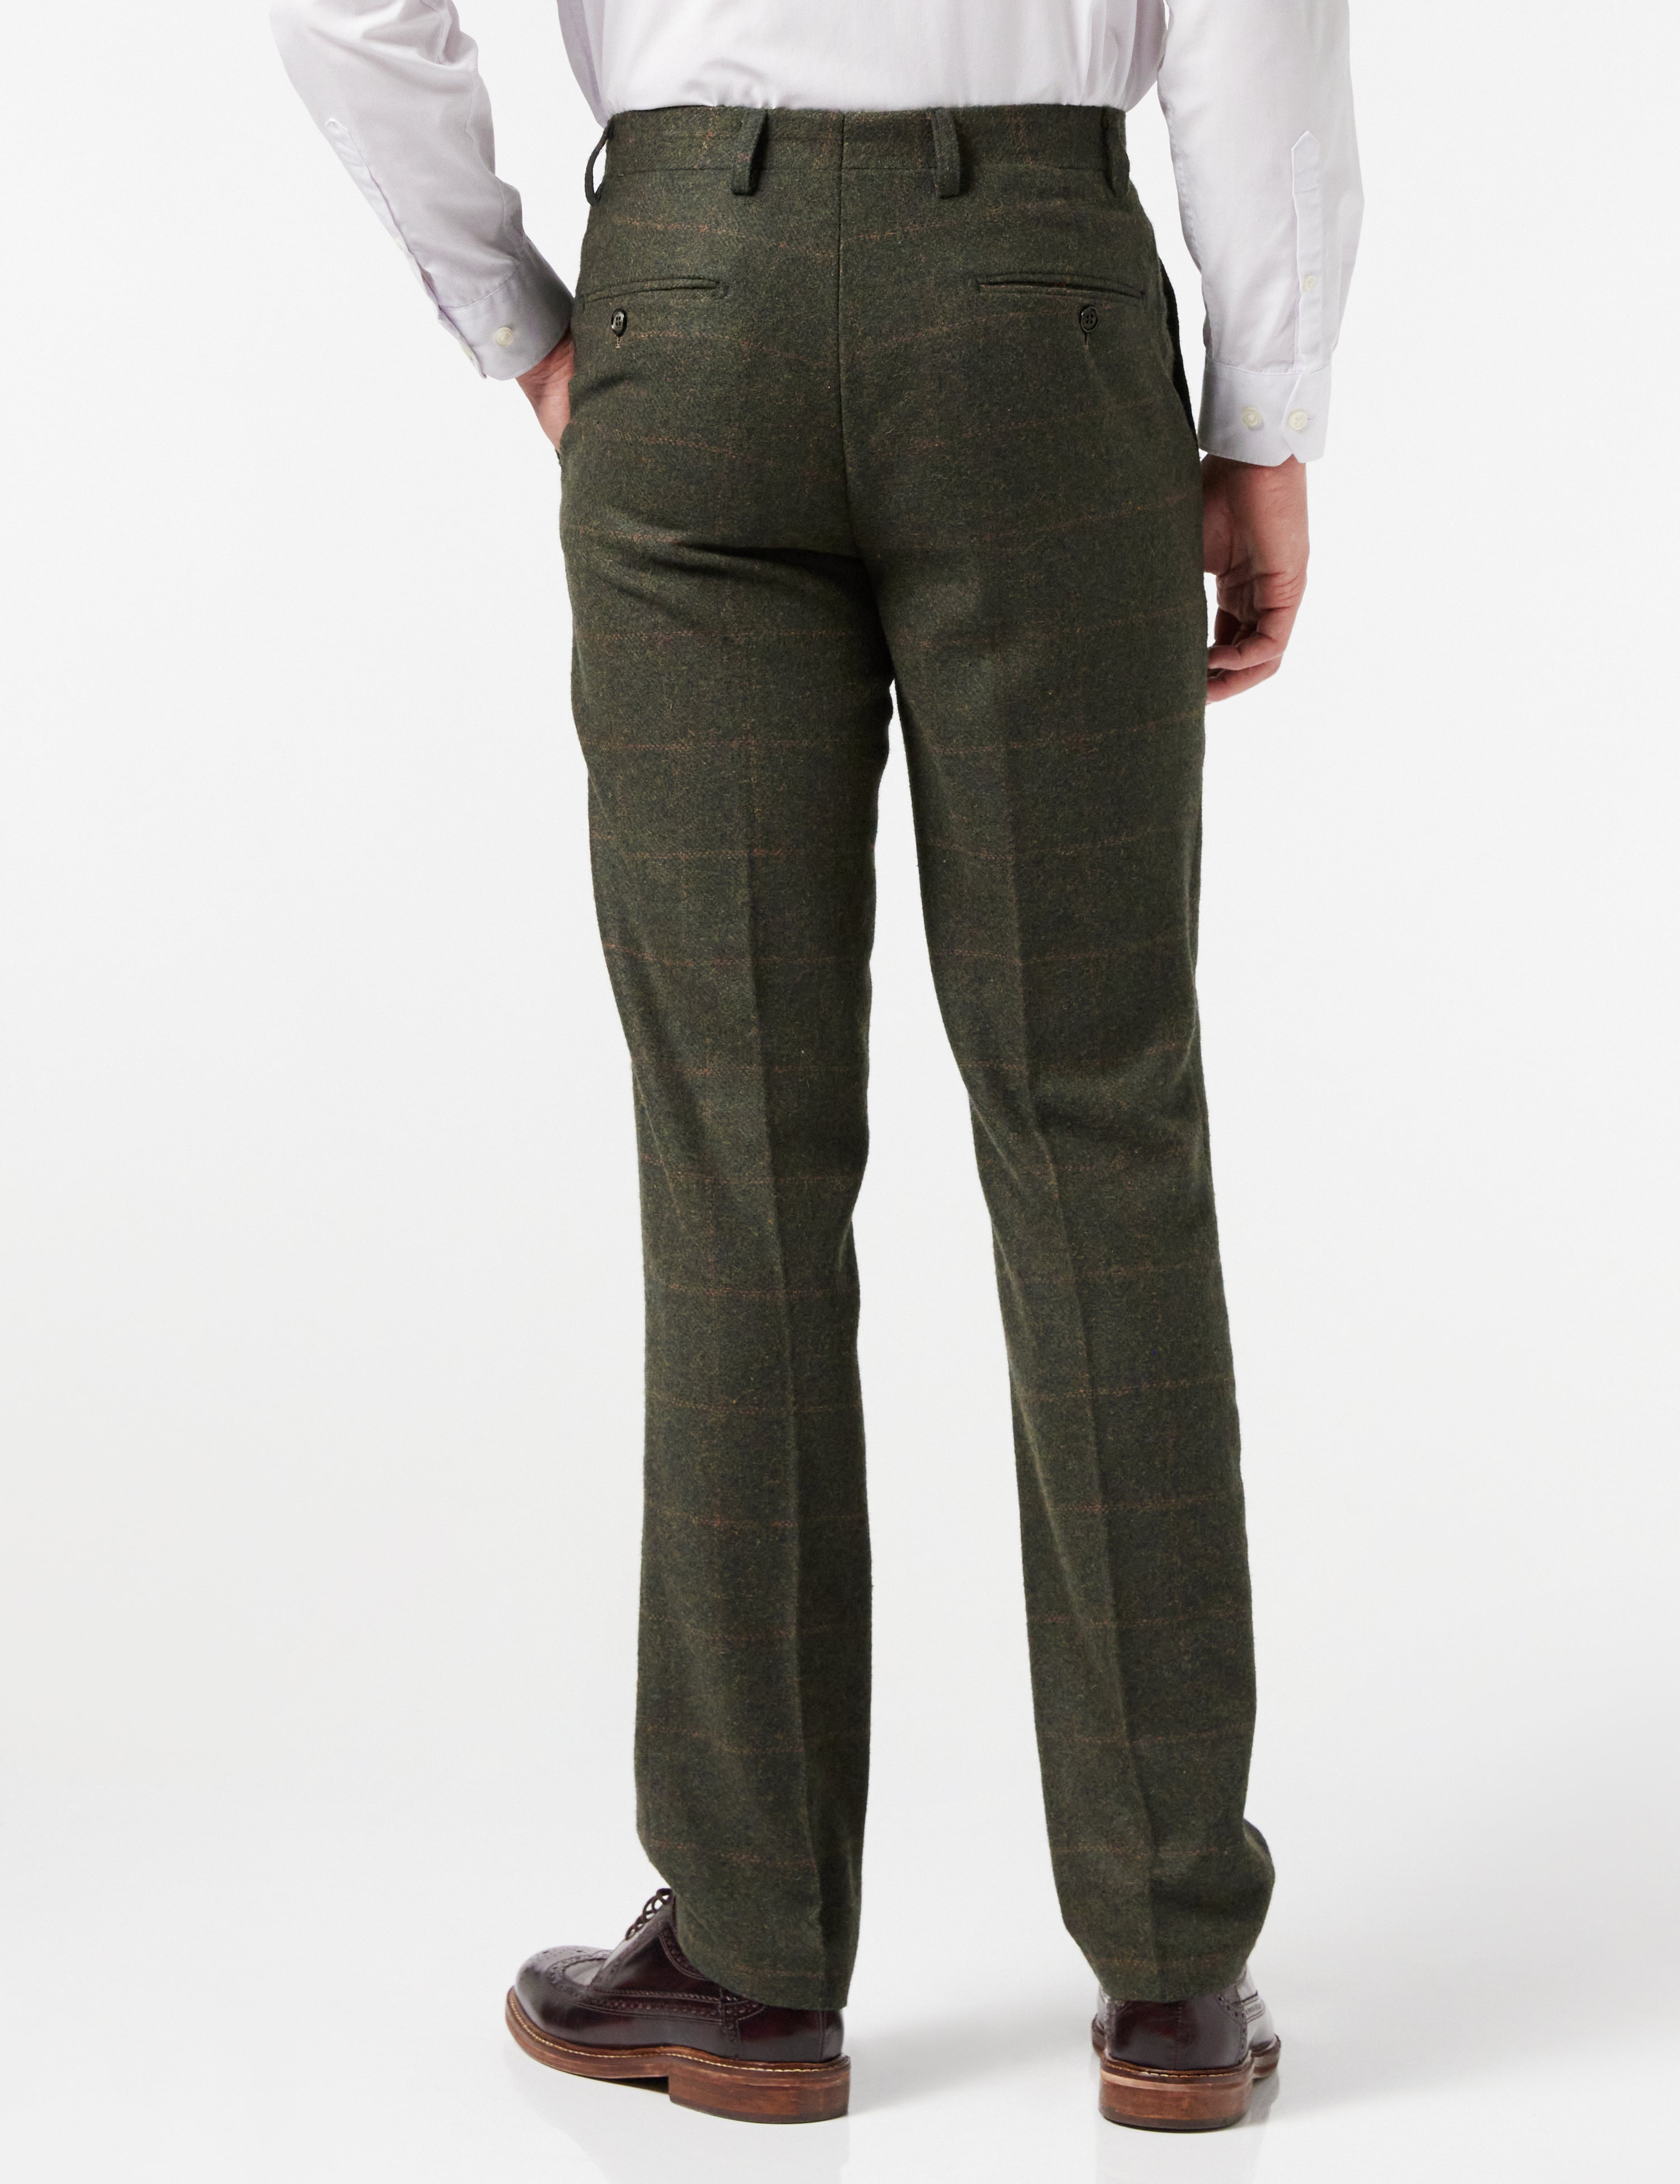 Green Tweed Check Suit Trouser